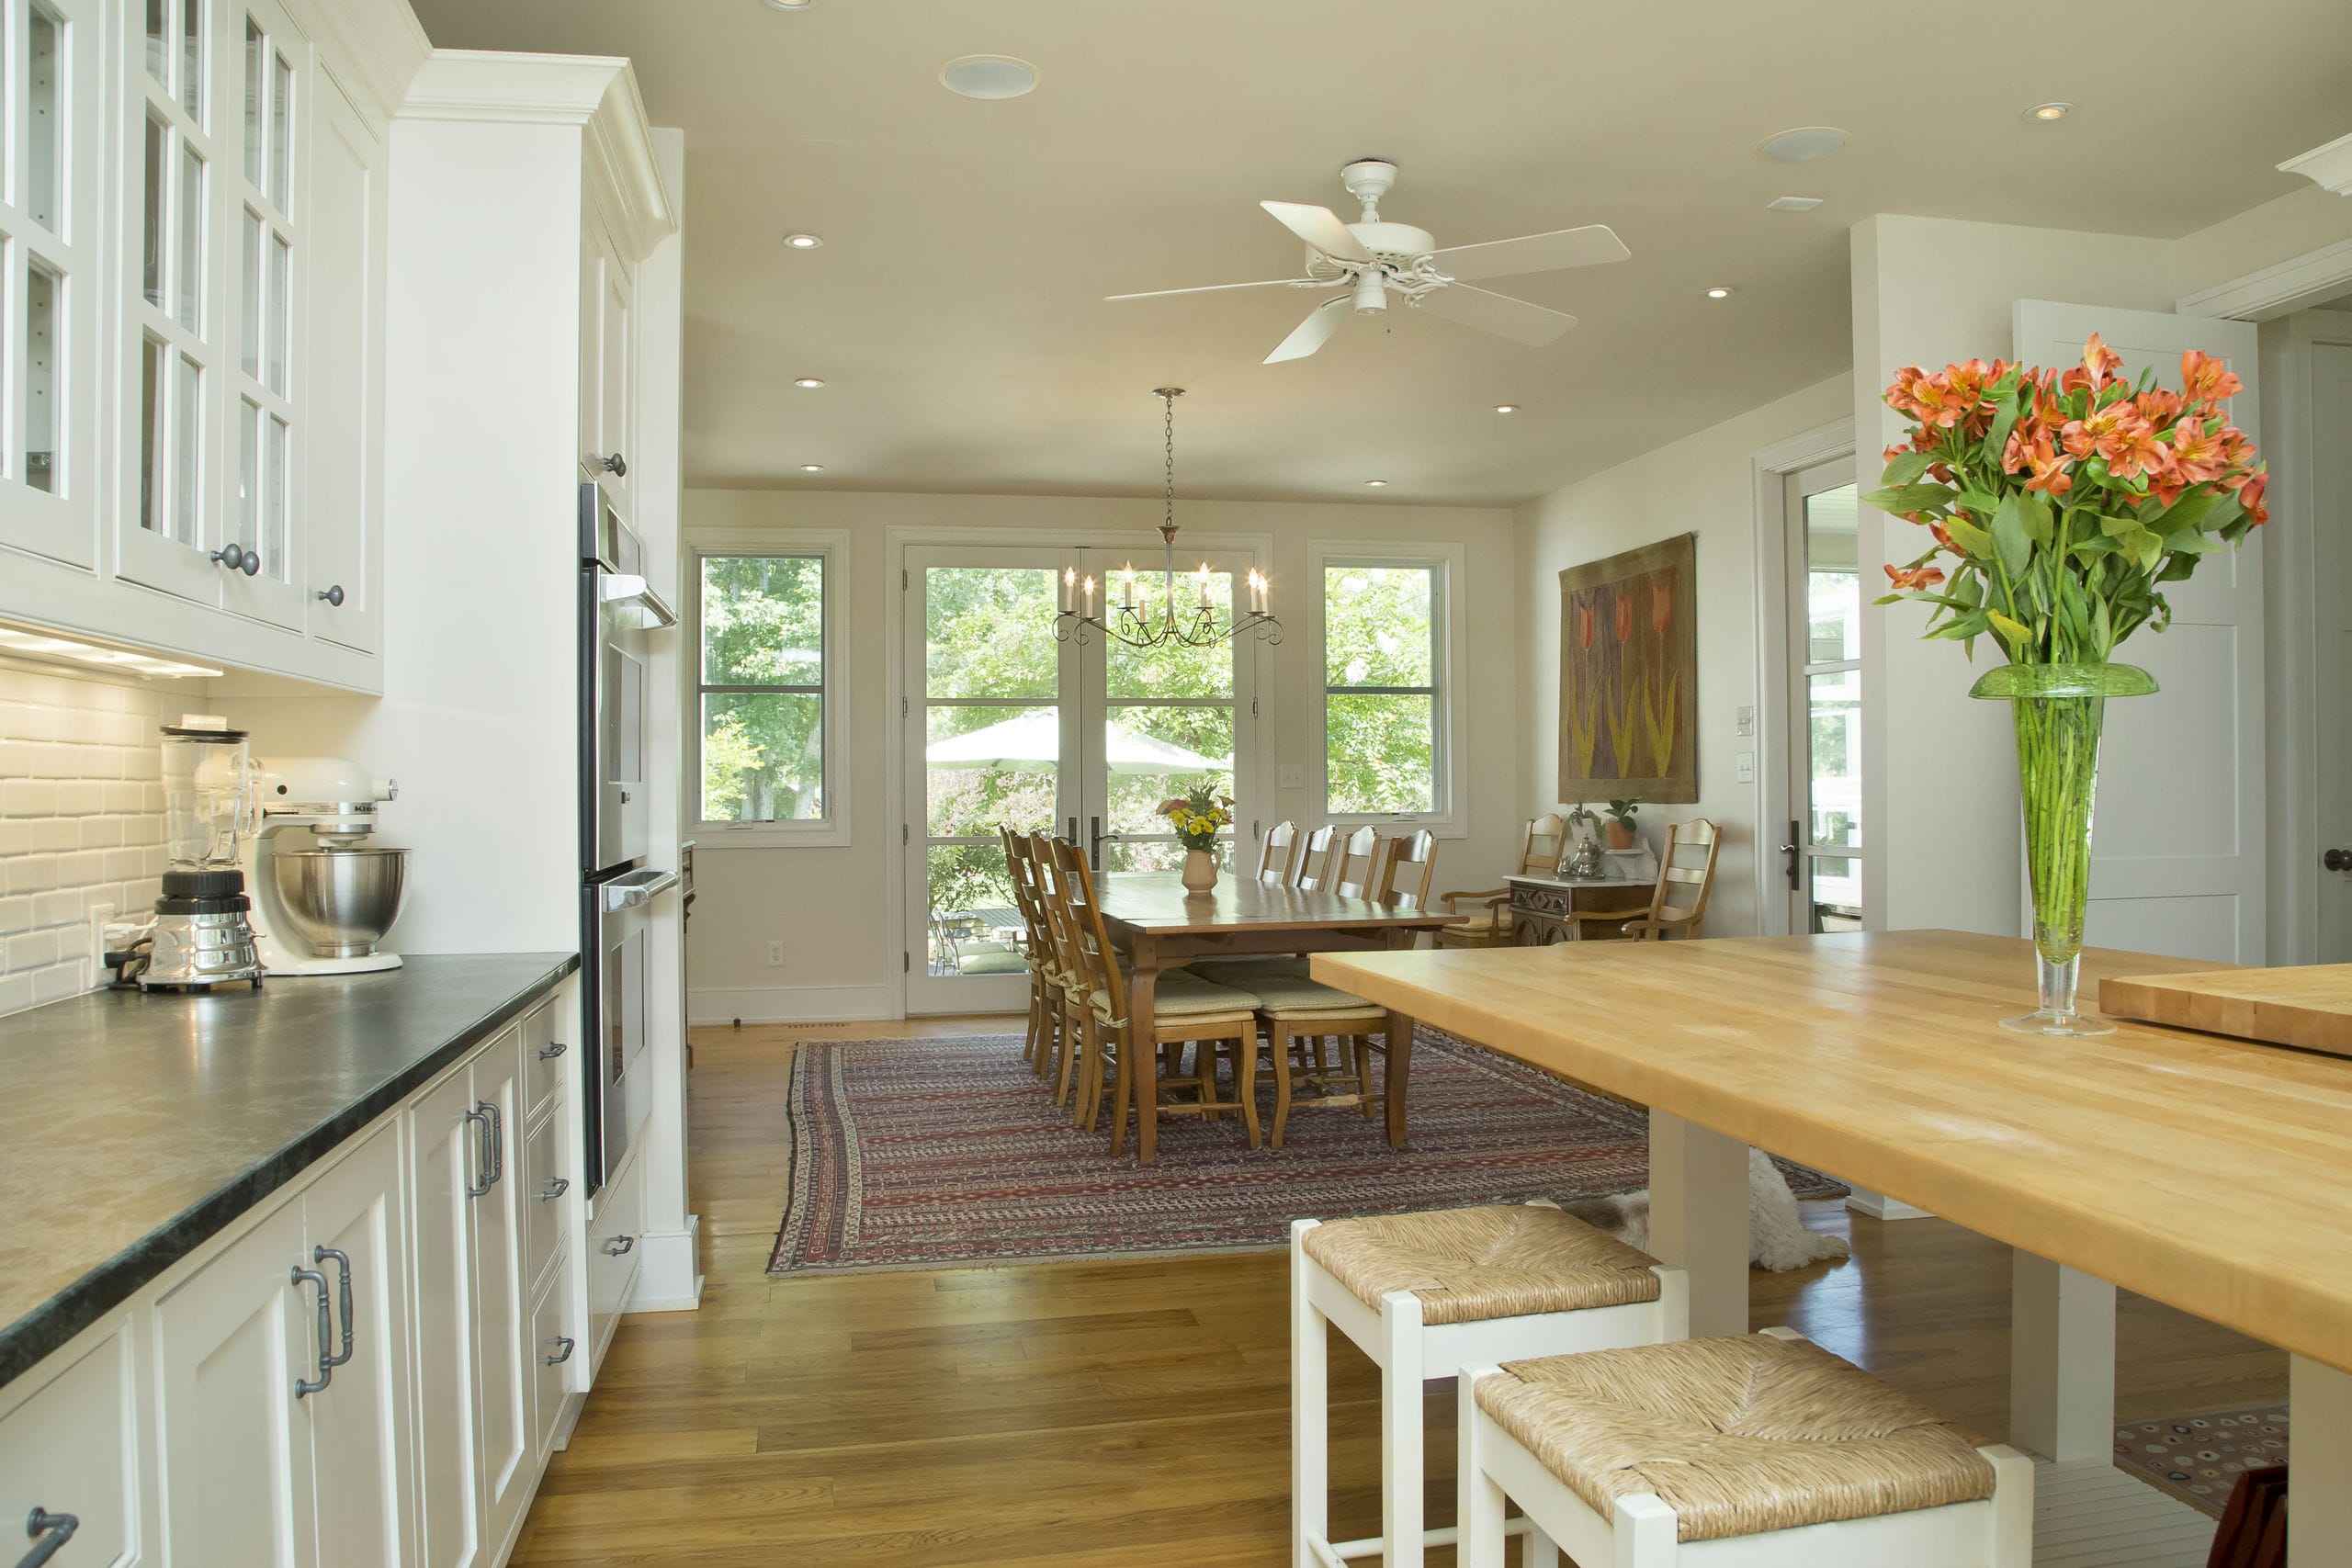 Contempory open kitchen and dining room